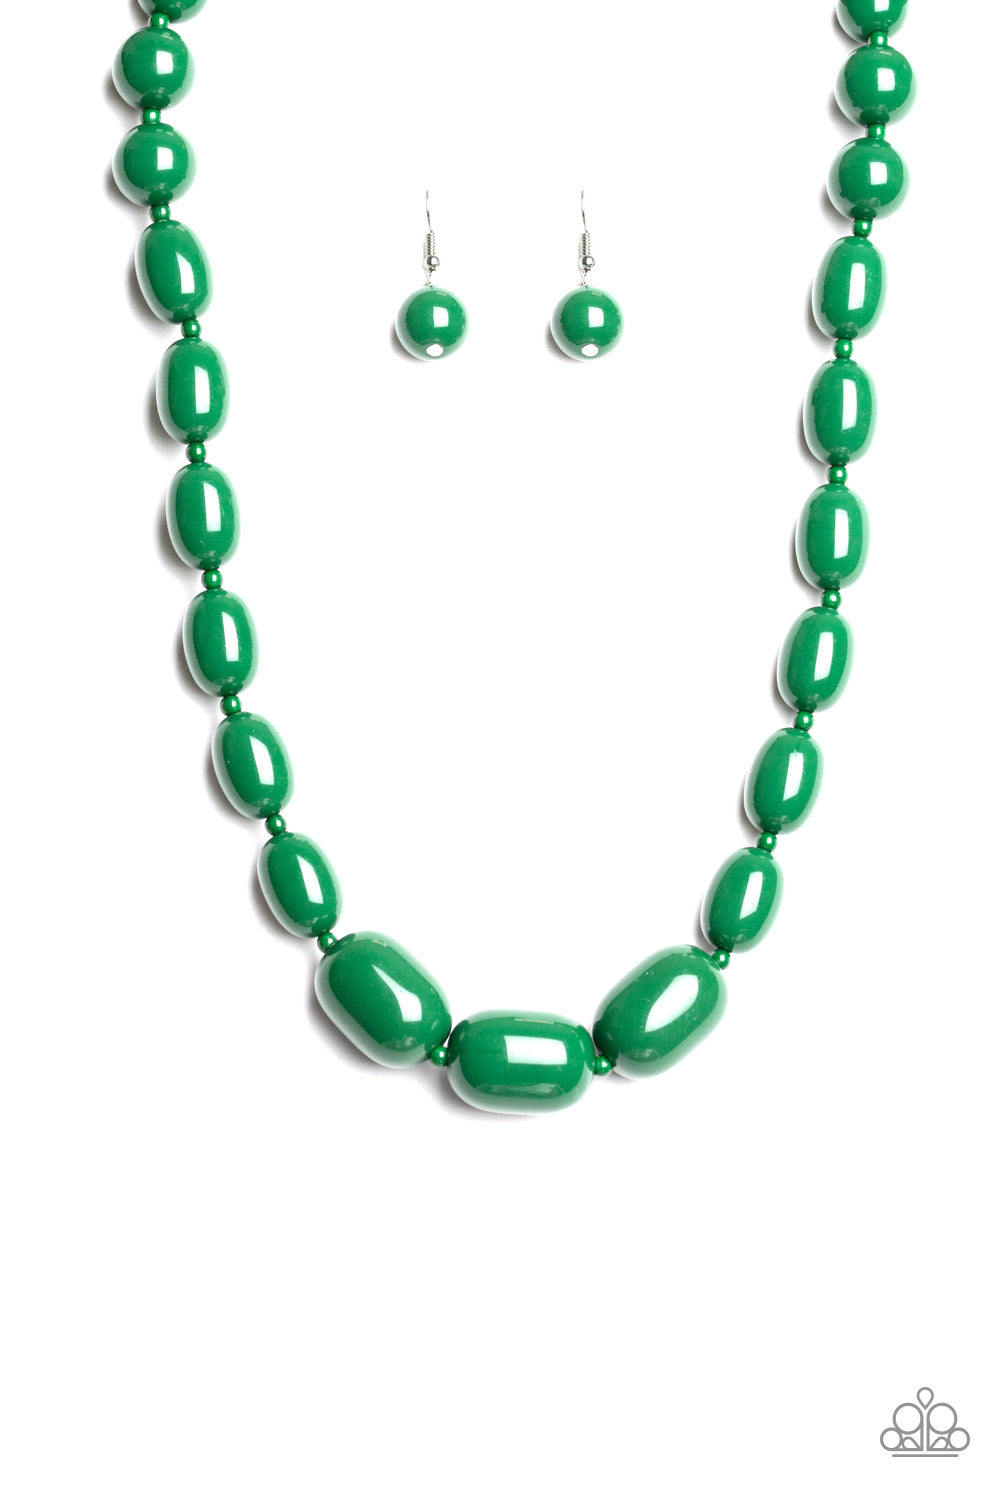 Poppin Popularity Green-Necklace